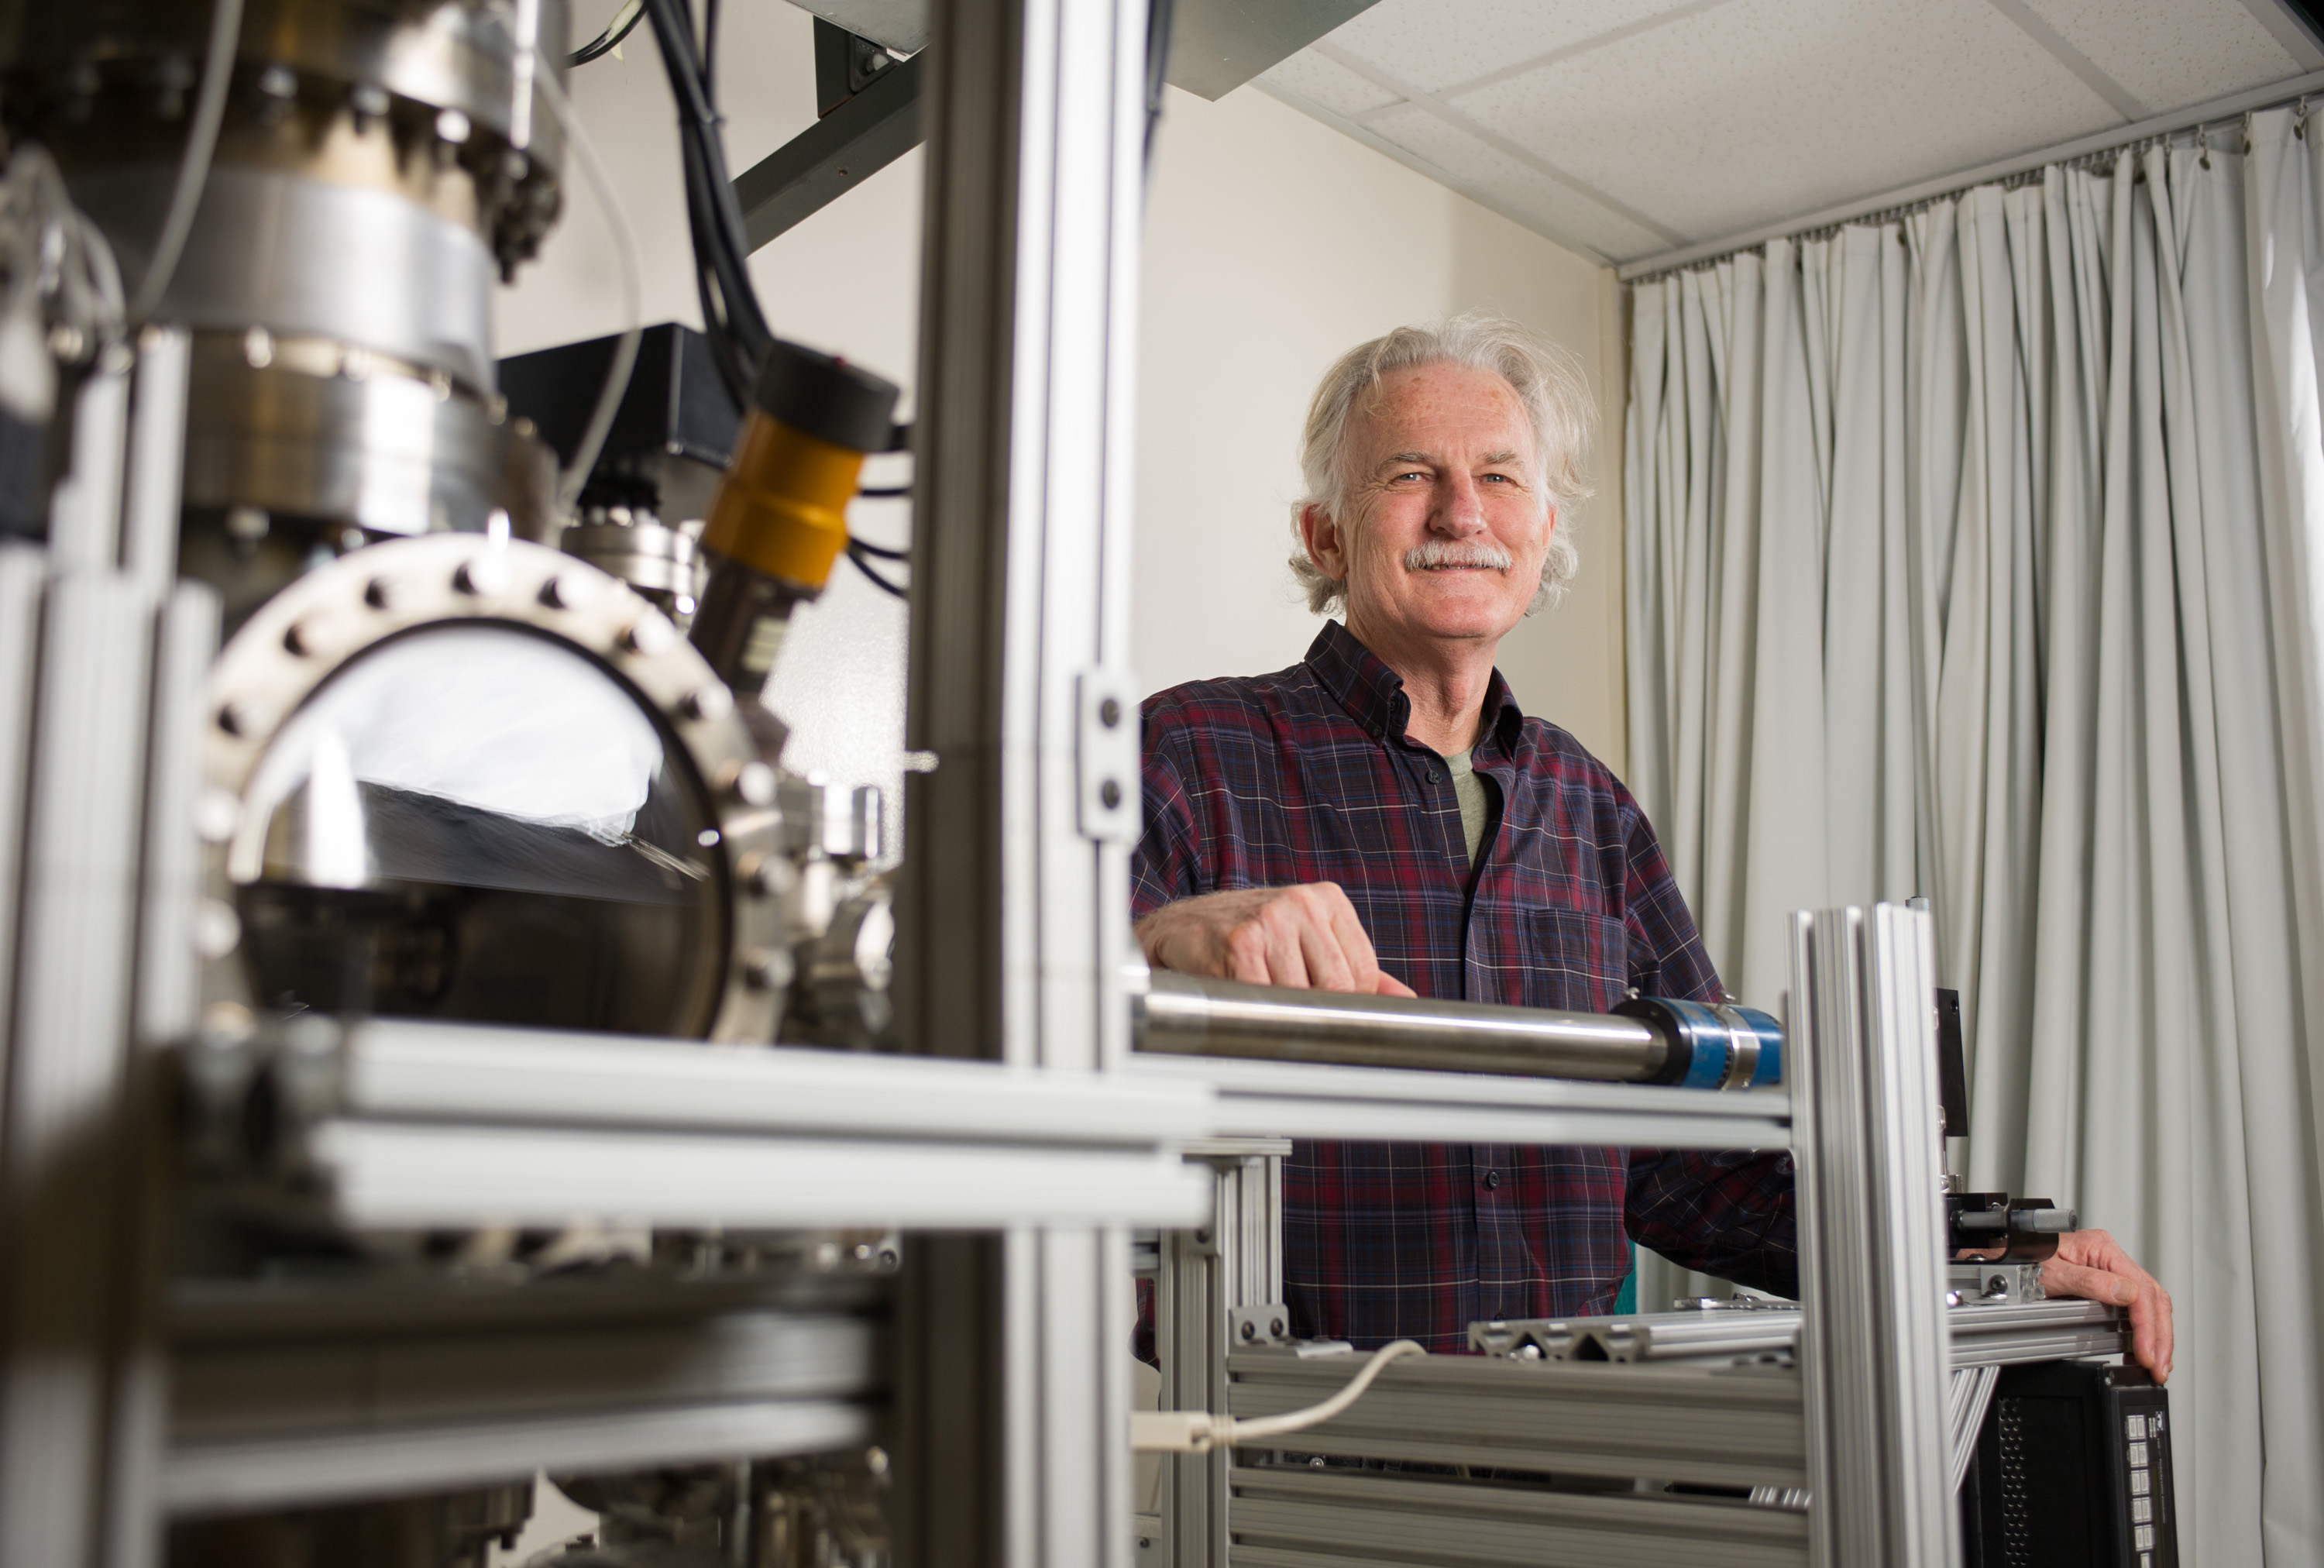 Walt de Heer, a Regent’s professor in the School of Physics at the Georgia Institute of Technology, poses with equipment used to measure the properties of graphene nanoribbons. De Heer and collaborators from three other institutions have reported ballistic transport properties in graphene nanoribbons that are about 40 nanometers wide. (Georgia Tech Photo: Rob Felt)